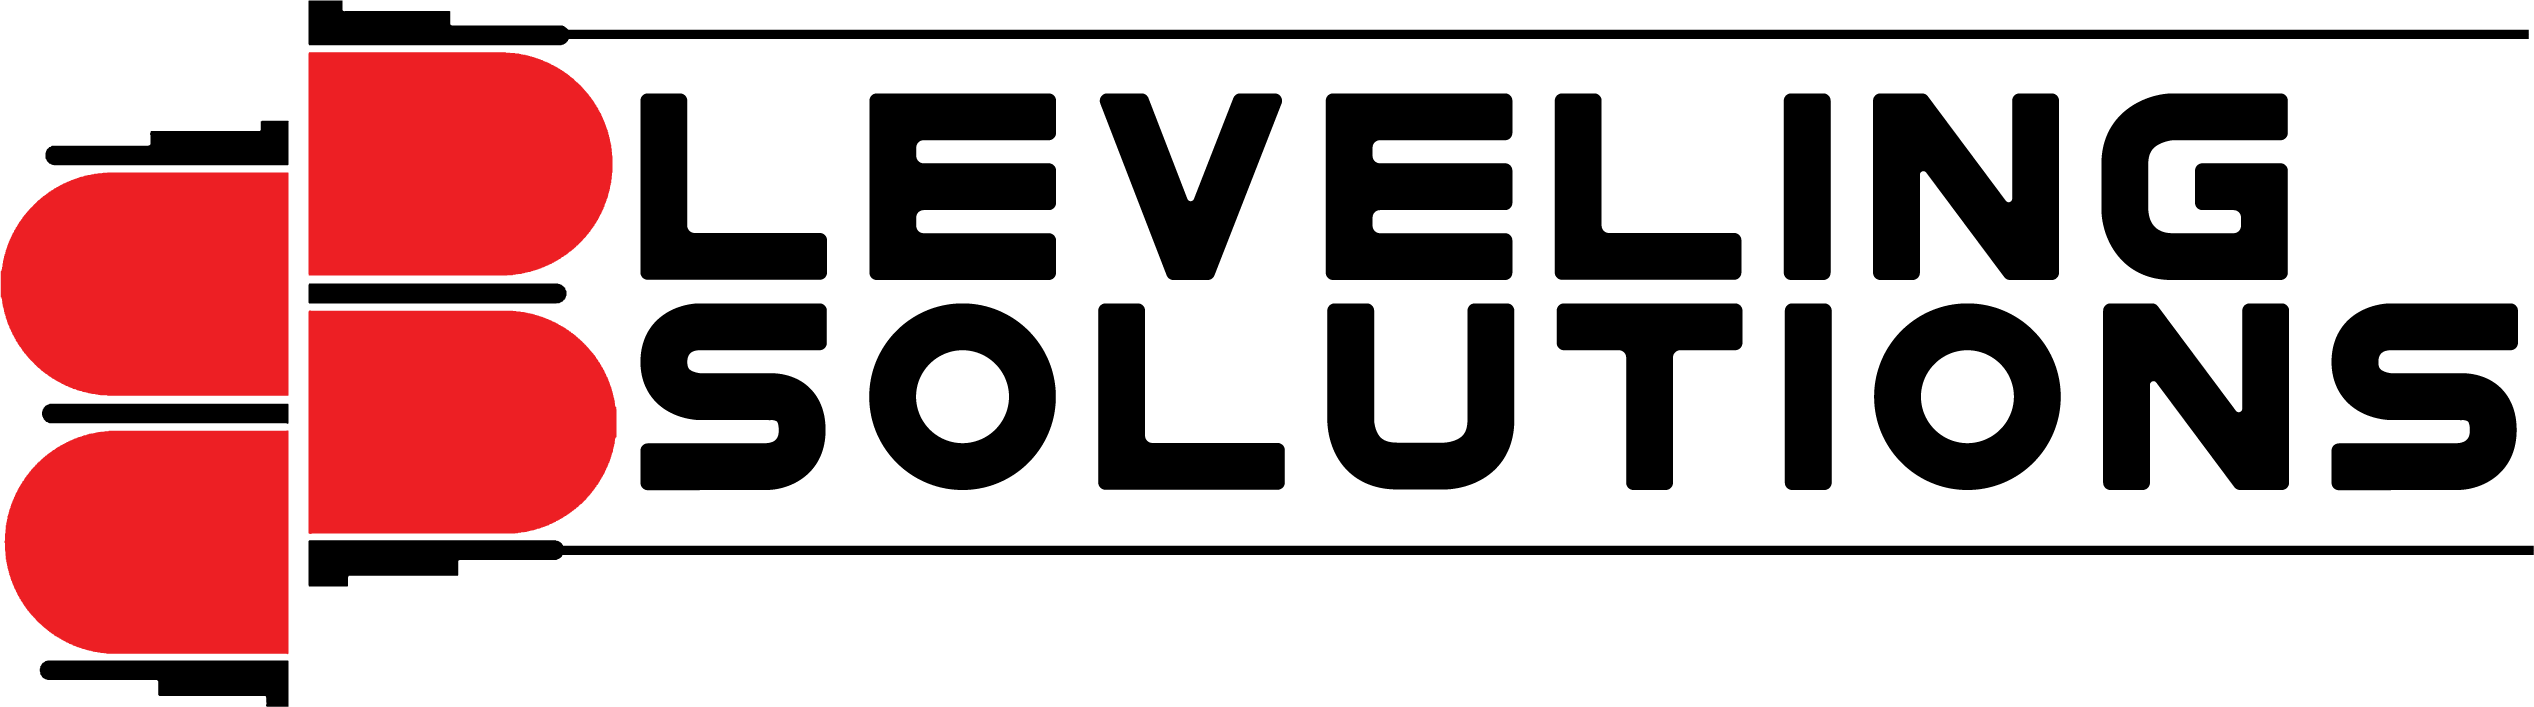 Leveling Solutions Logo